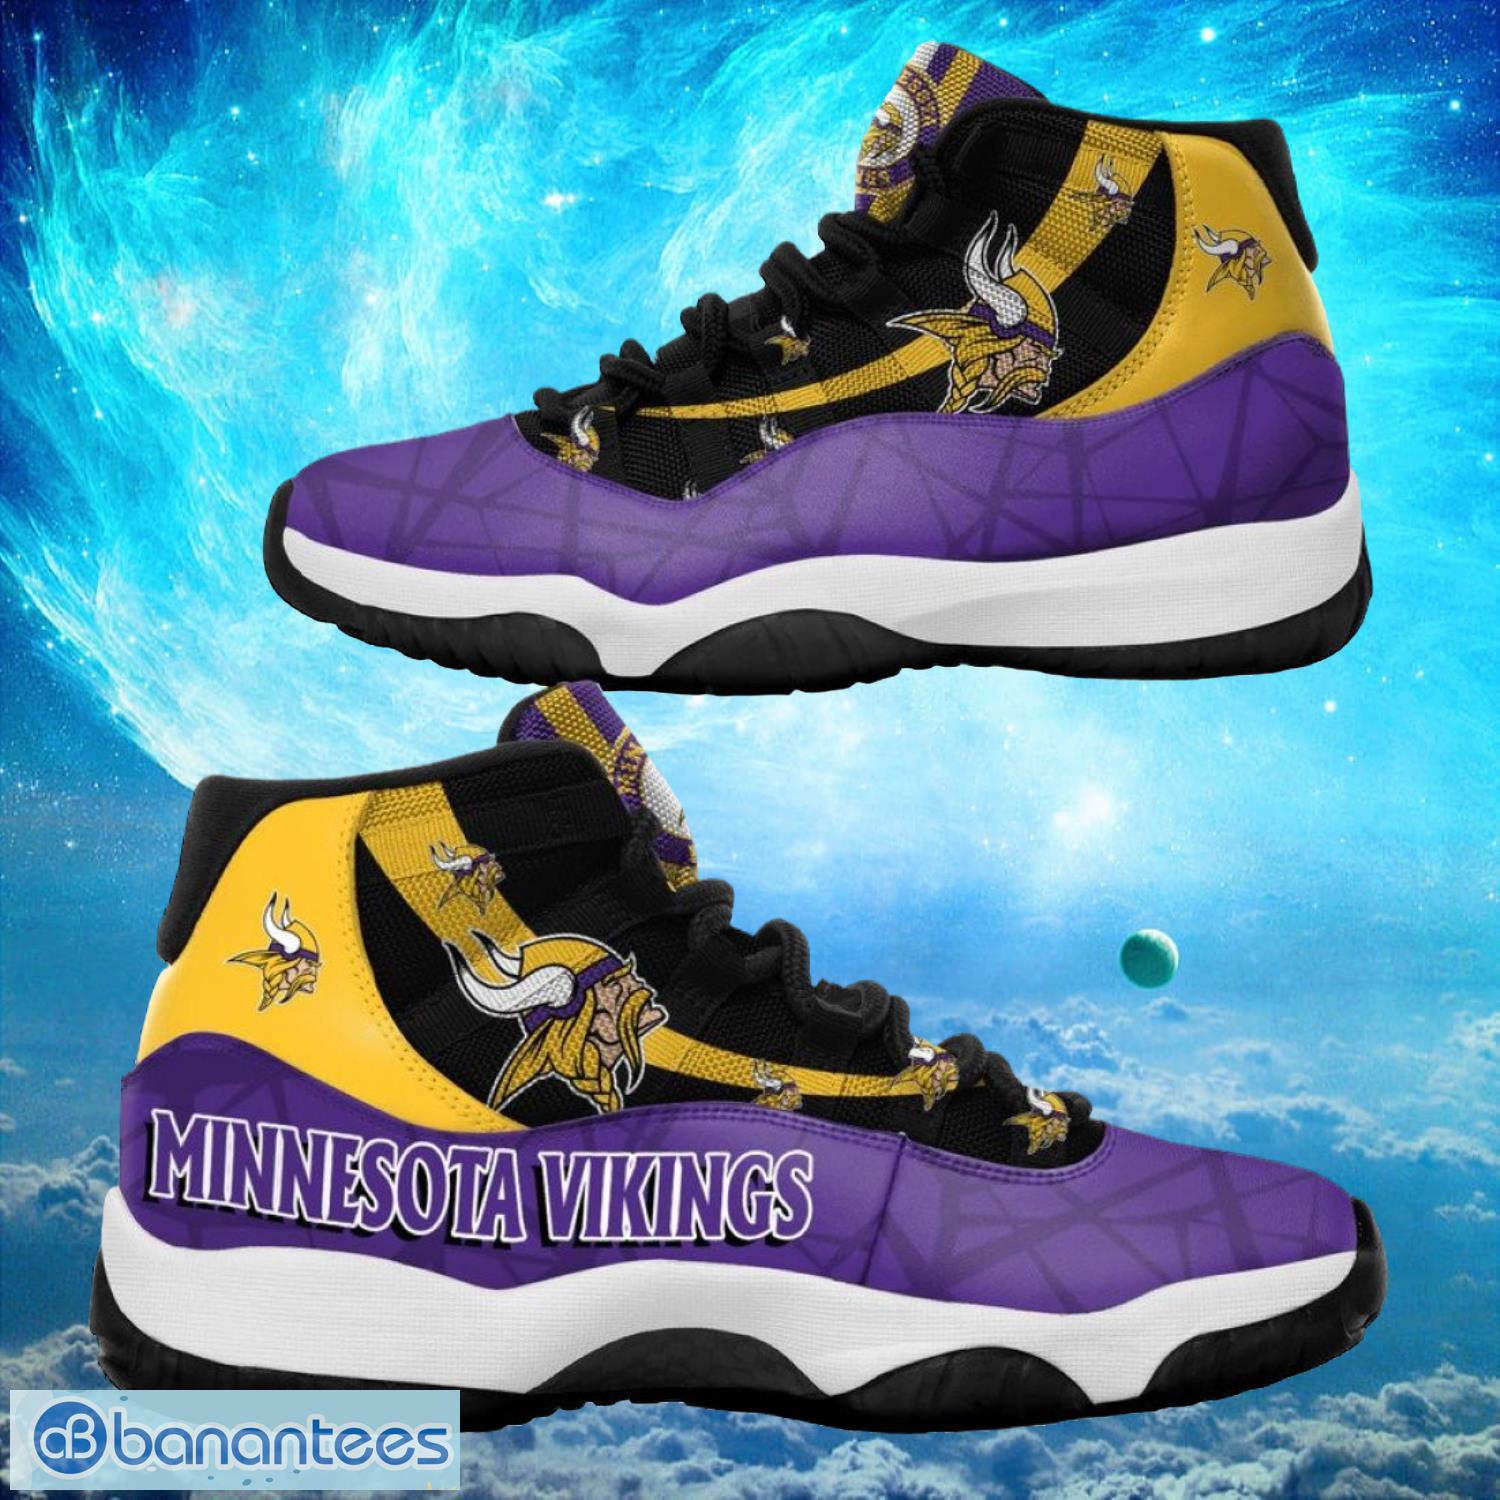 Minnesota Vikings NFL Air Jordan 11 Sneakers Shoes Gift For Fans Product Photo 1